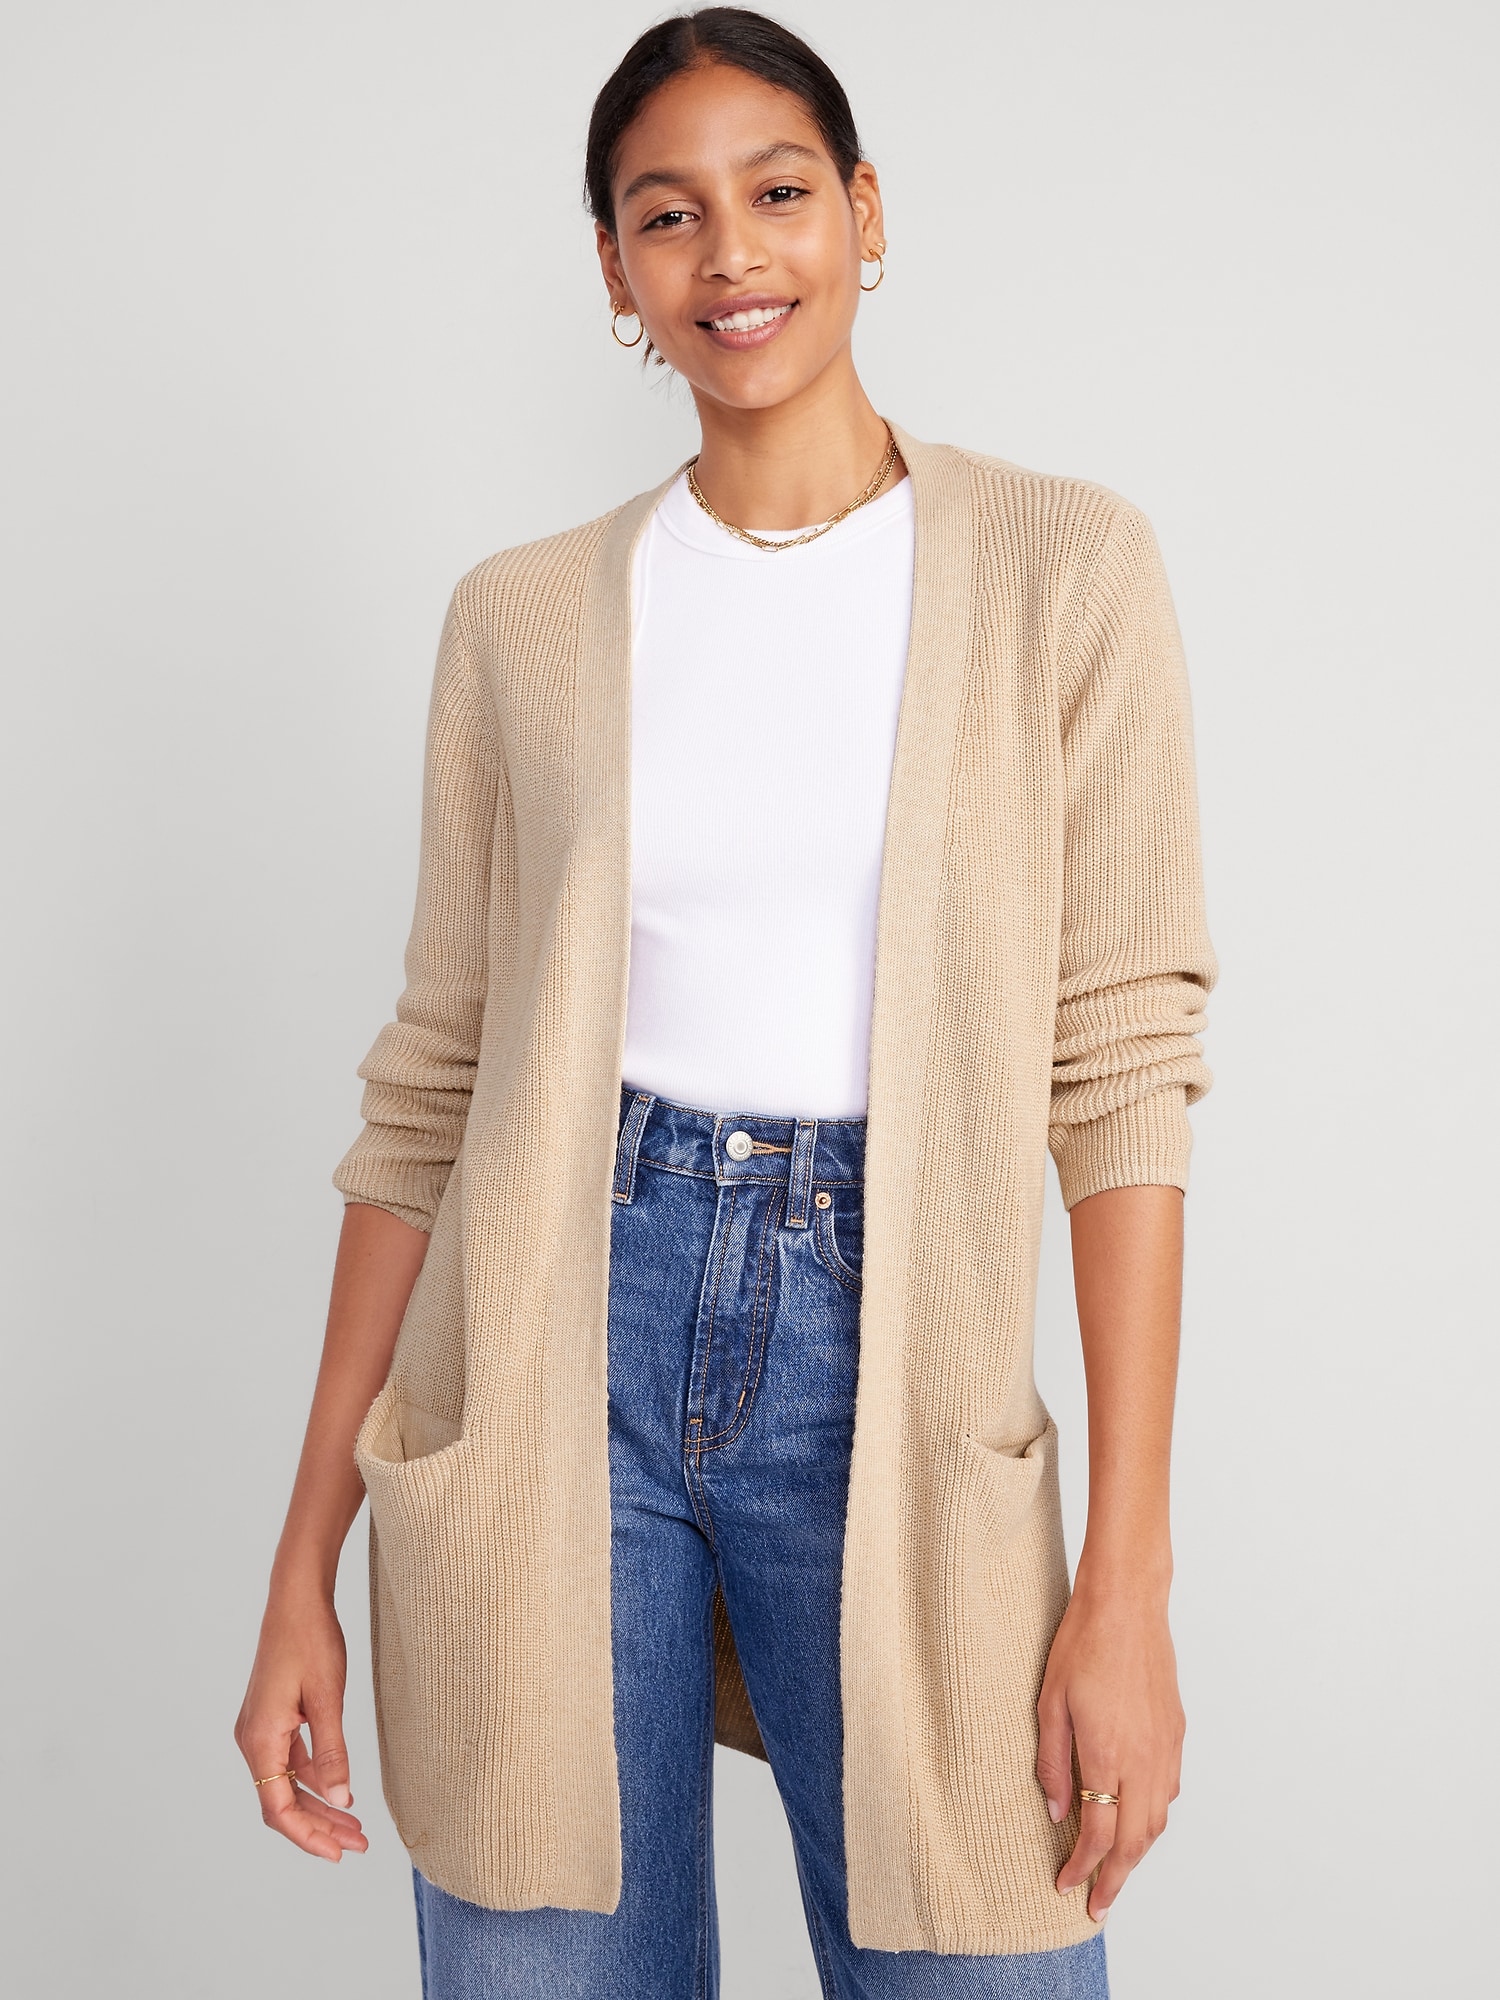 Textured Open-Front Sweater | Old Navy